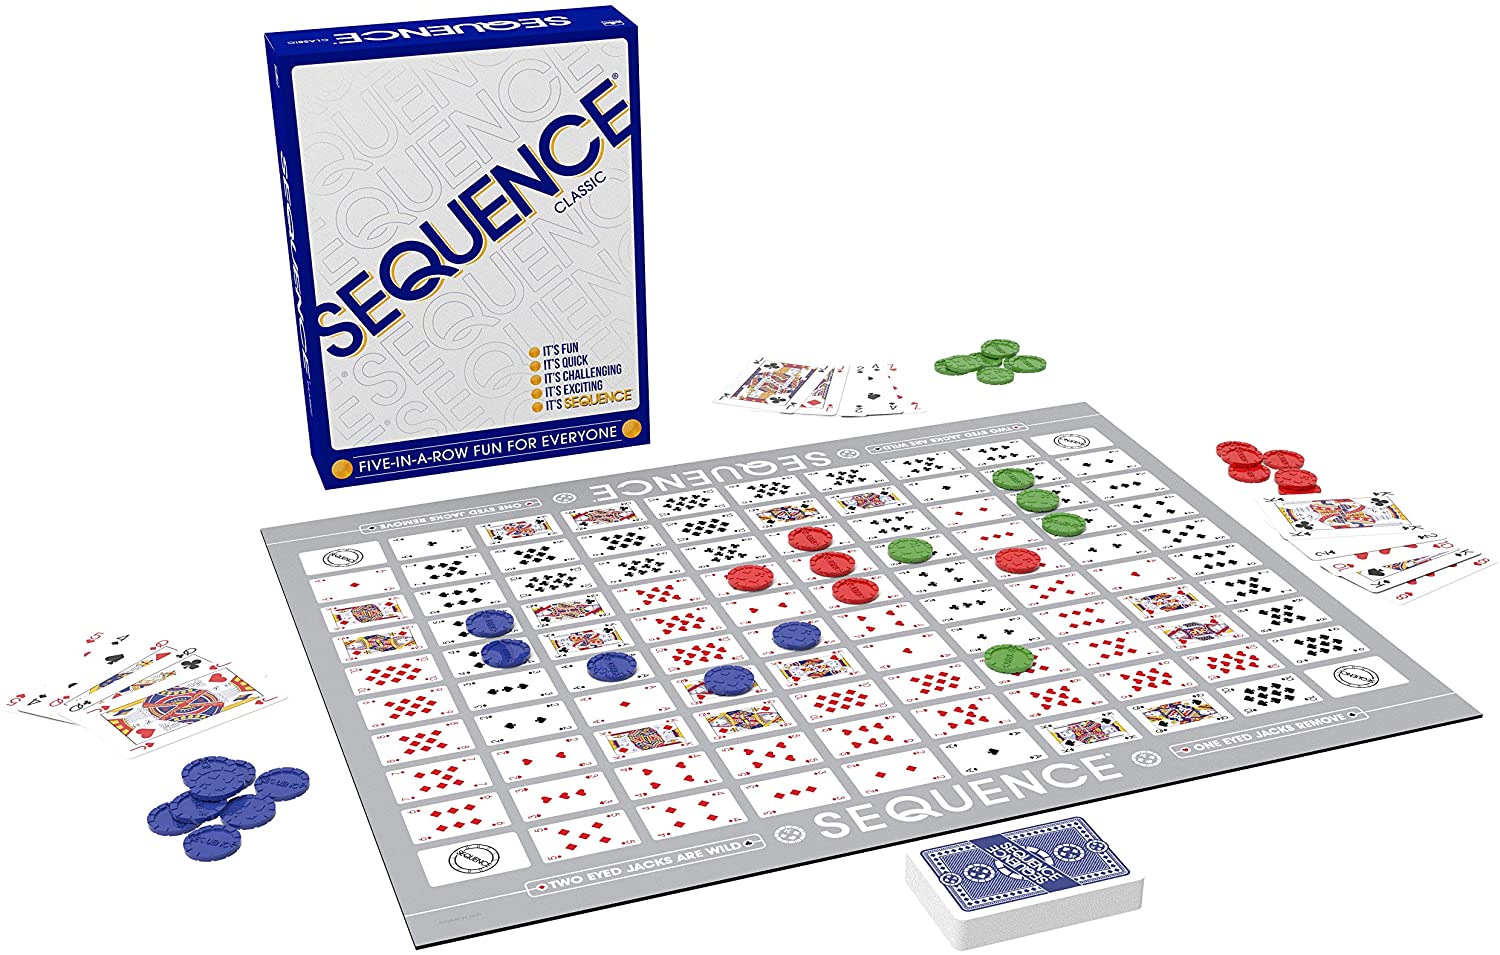 free printable sequence board game